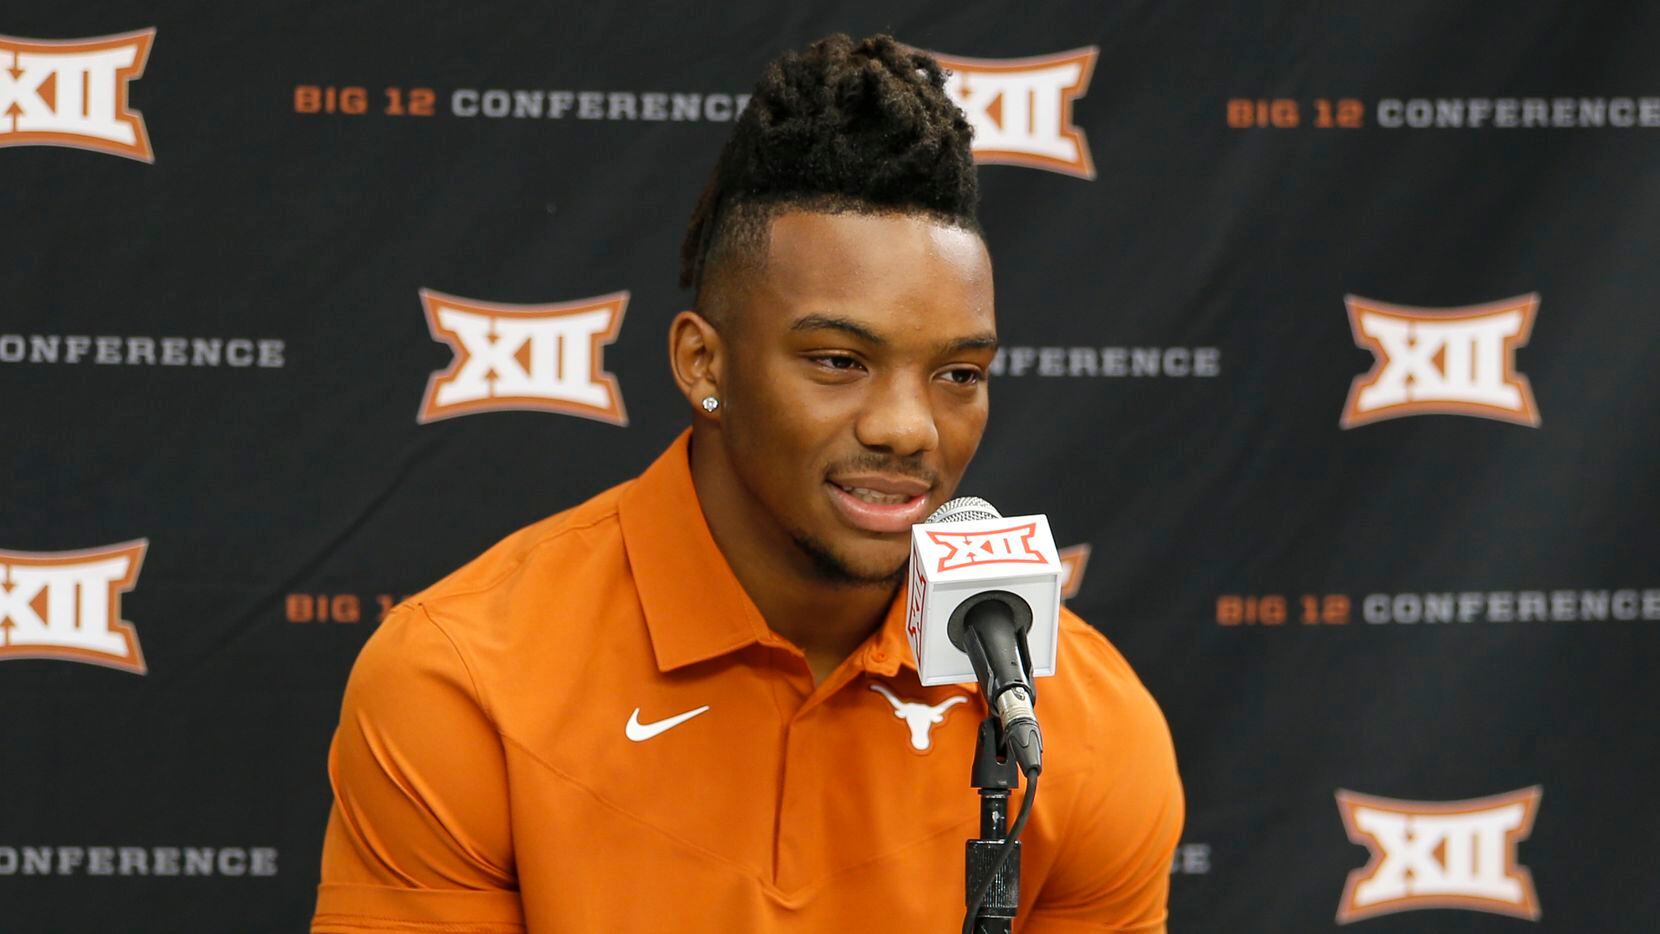 Texas running back Bijan Robinson speaks during a breakout session at the Big 12 Conference...